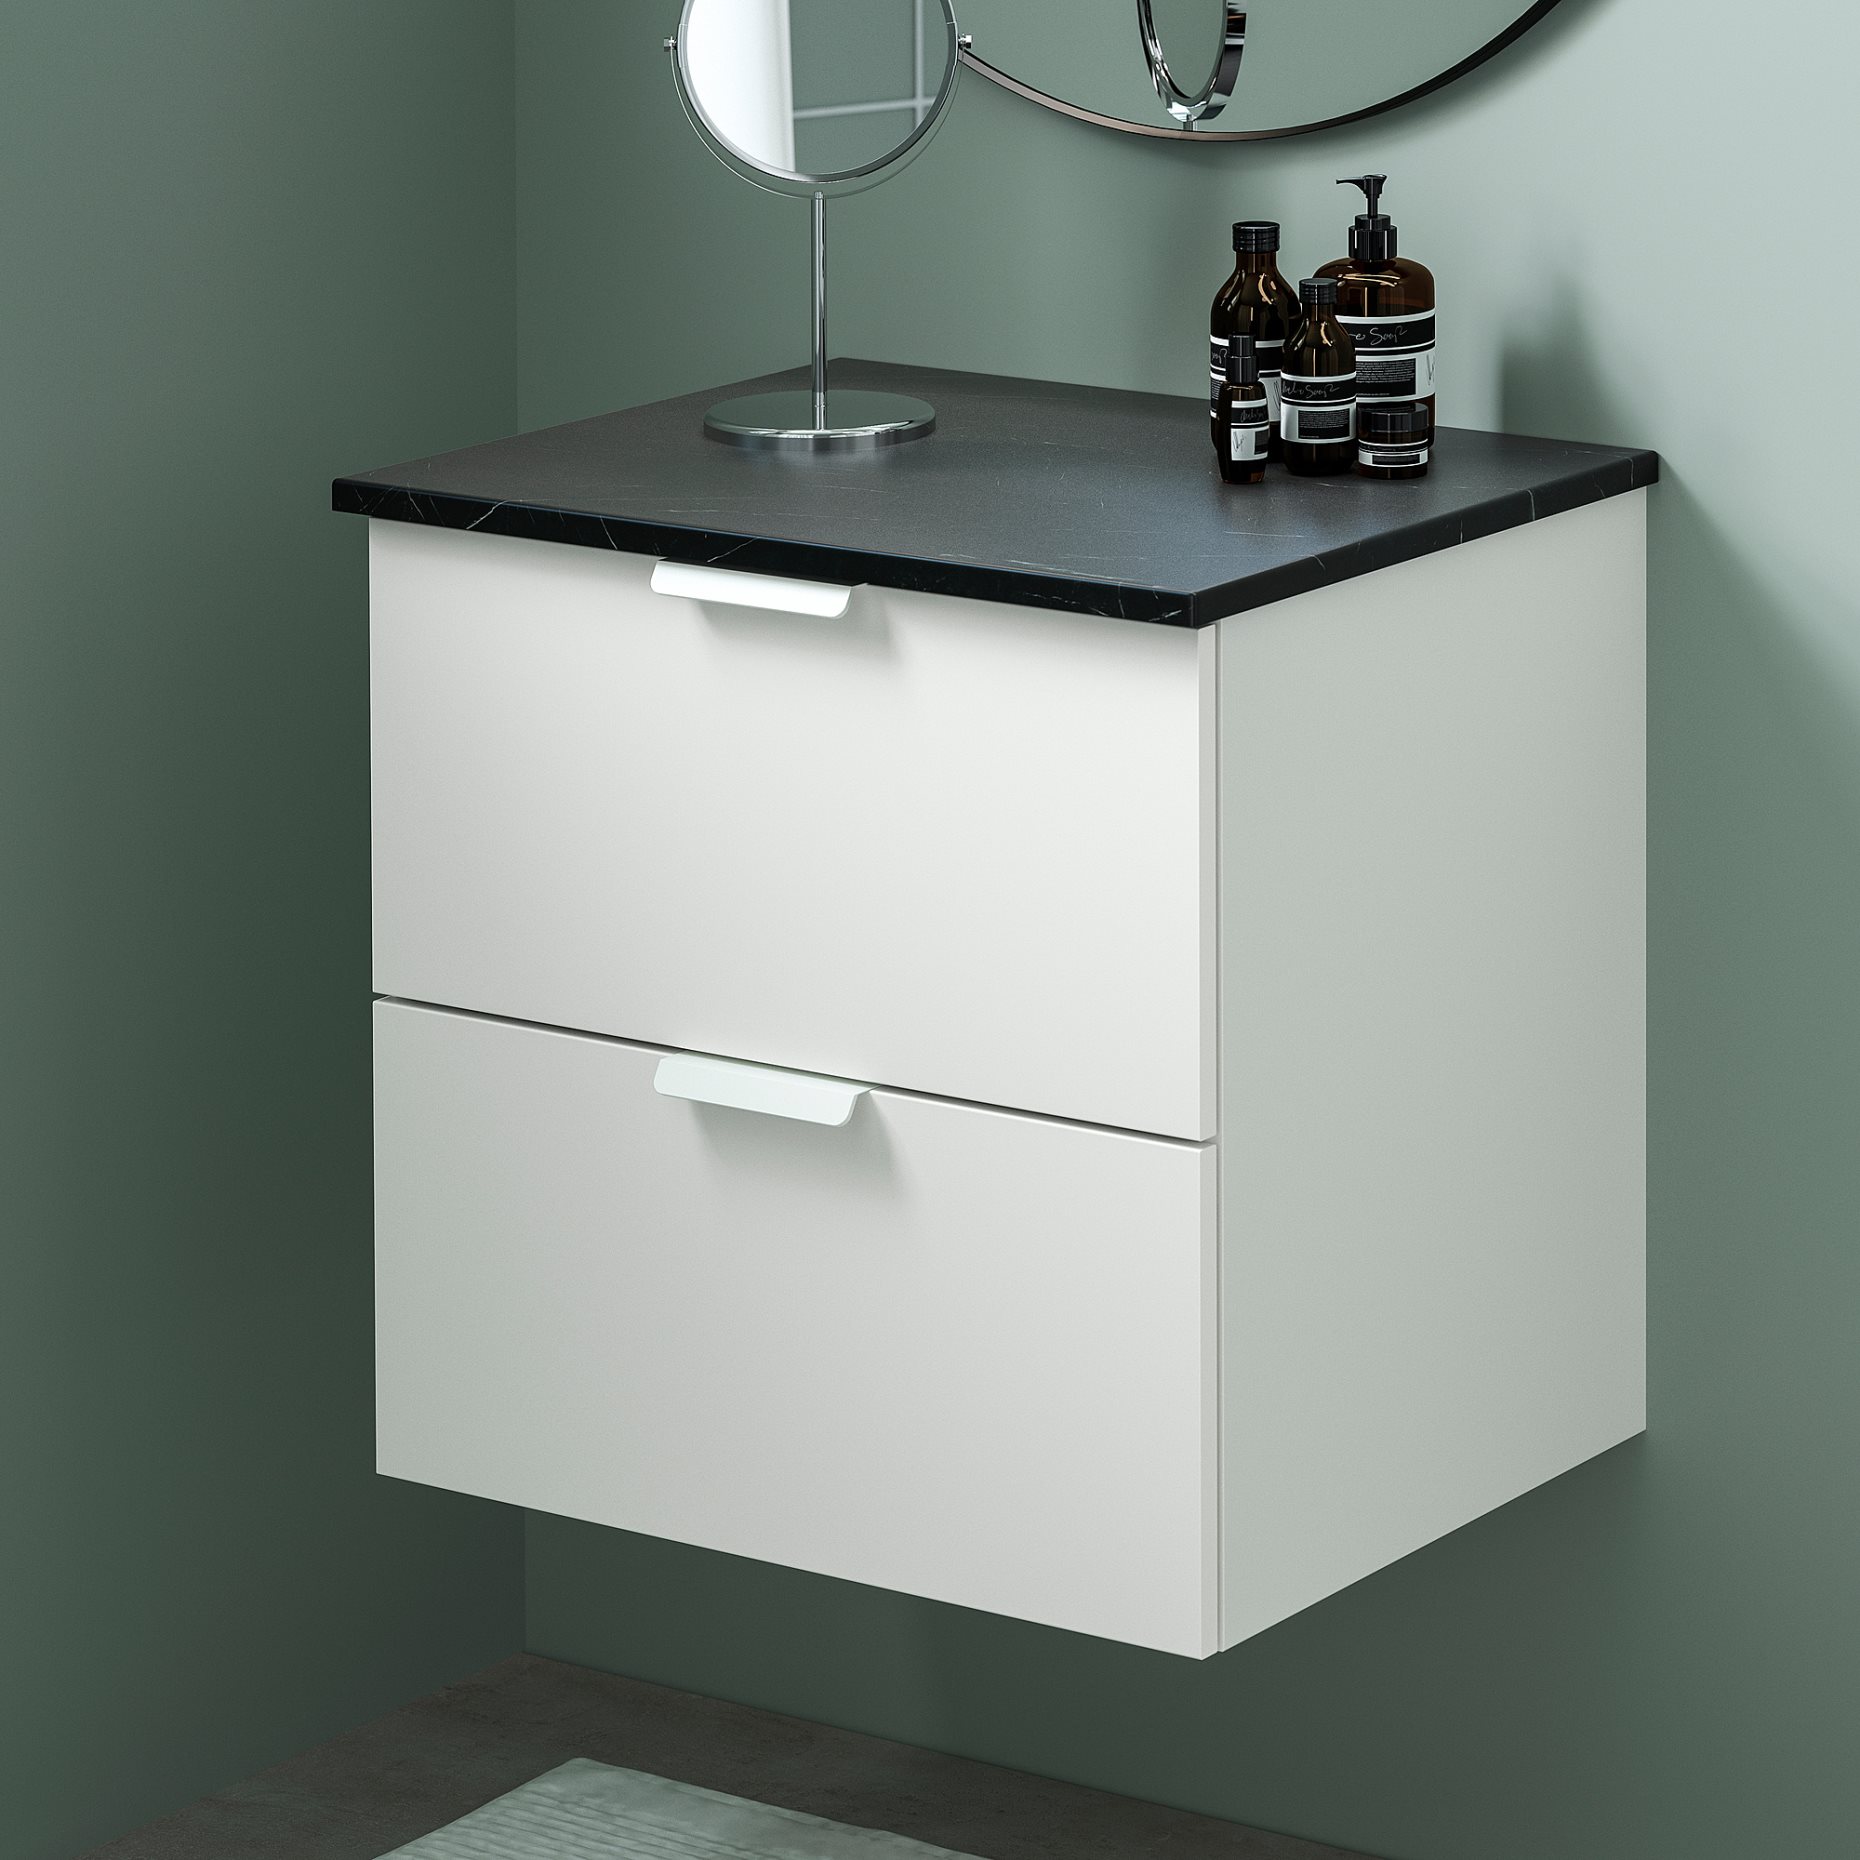 GODMORGON/TOLKEN, wash-stand with 2 drawers, 62x49x60 cm, 694.825.29